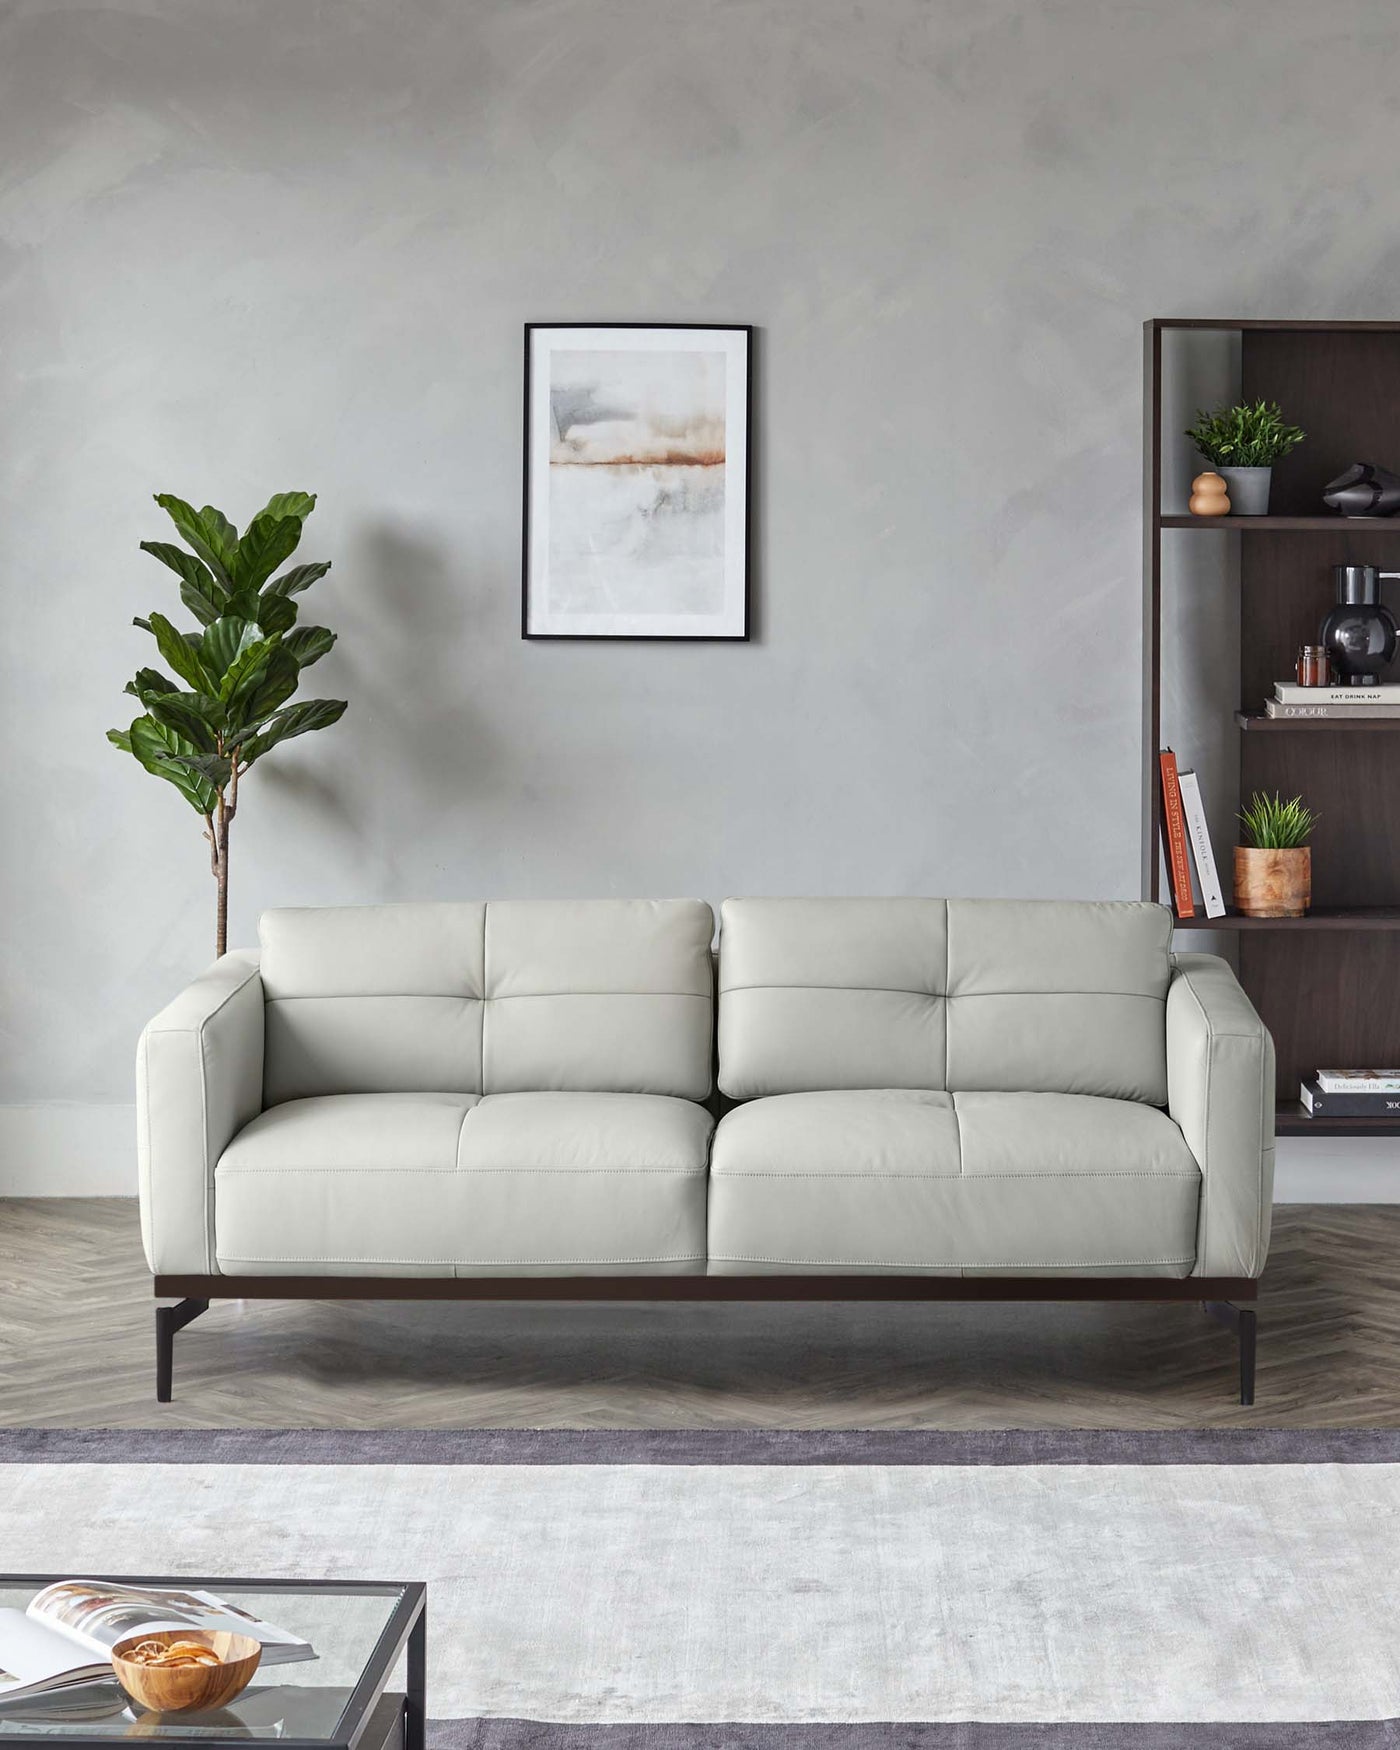 A modern light grey three-seater sofa with clean lines, tufted seat cushions, and dark wooden legs, paired with a dark brown wooden bookshelf filled with decorative items and books, set against a neutral-toned living room backdrop.